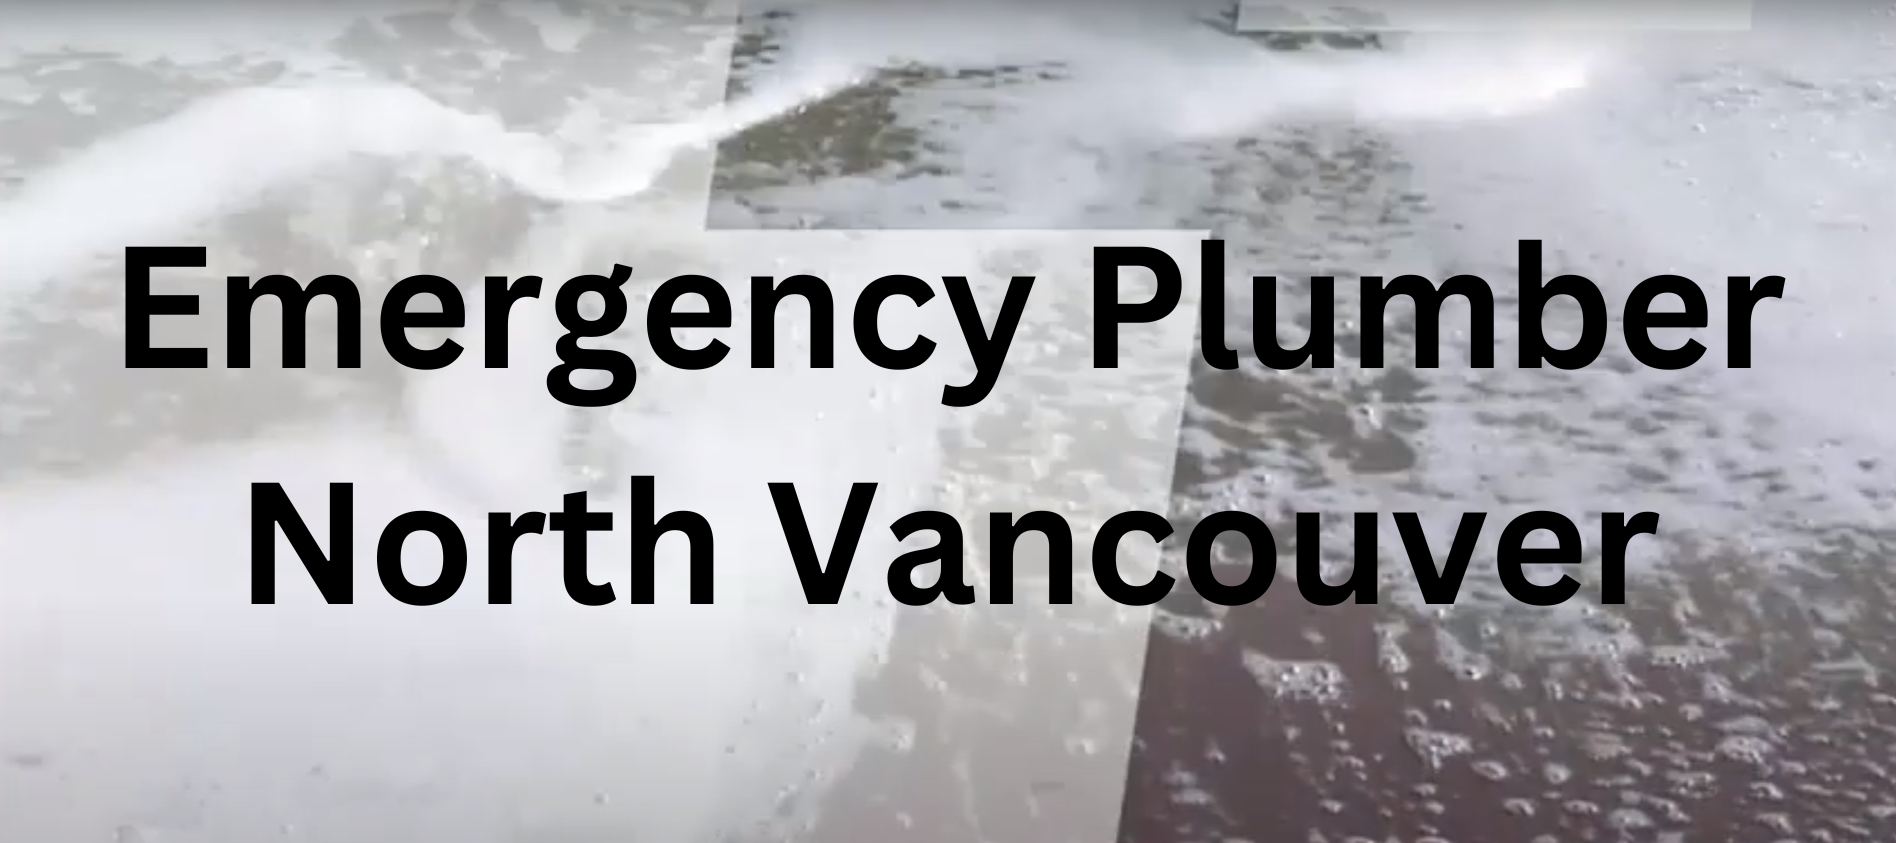 Emergency Plumber North Vancouver